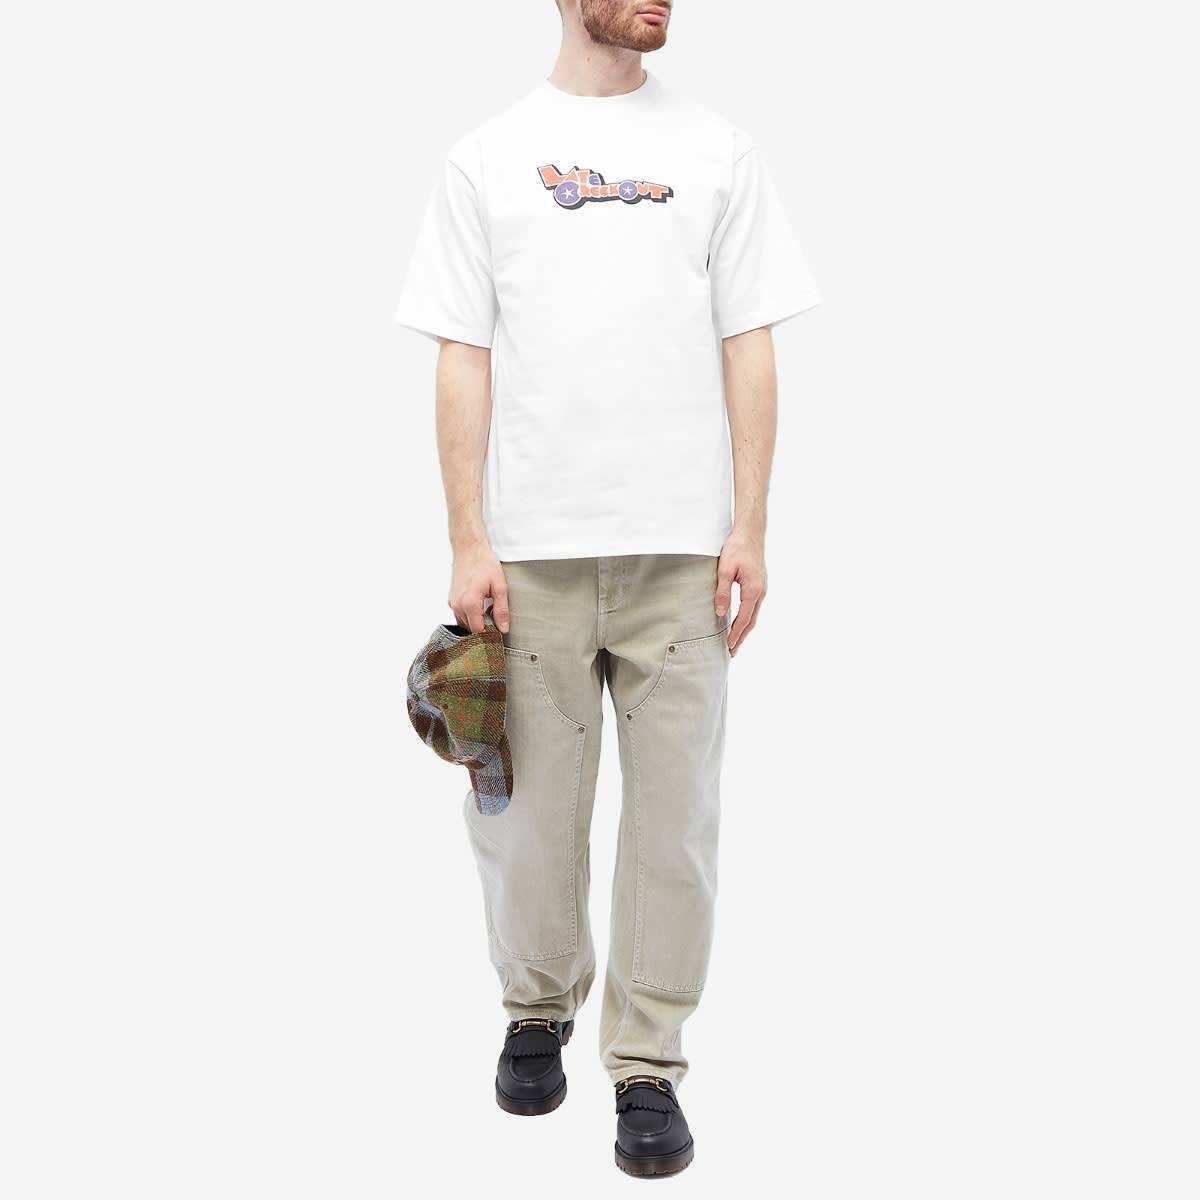 Late Checkout Racing Car T-Shirt in White Late Checkout